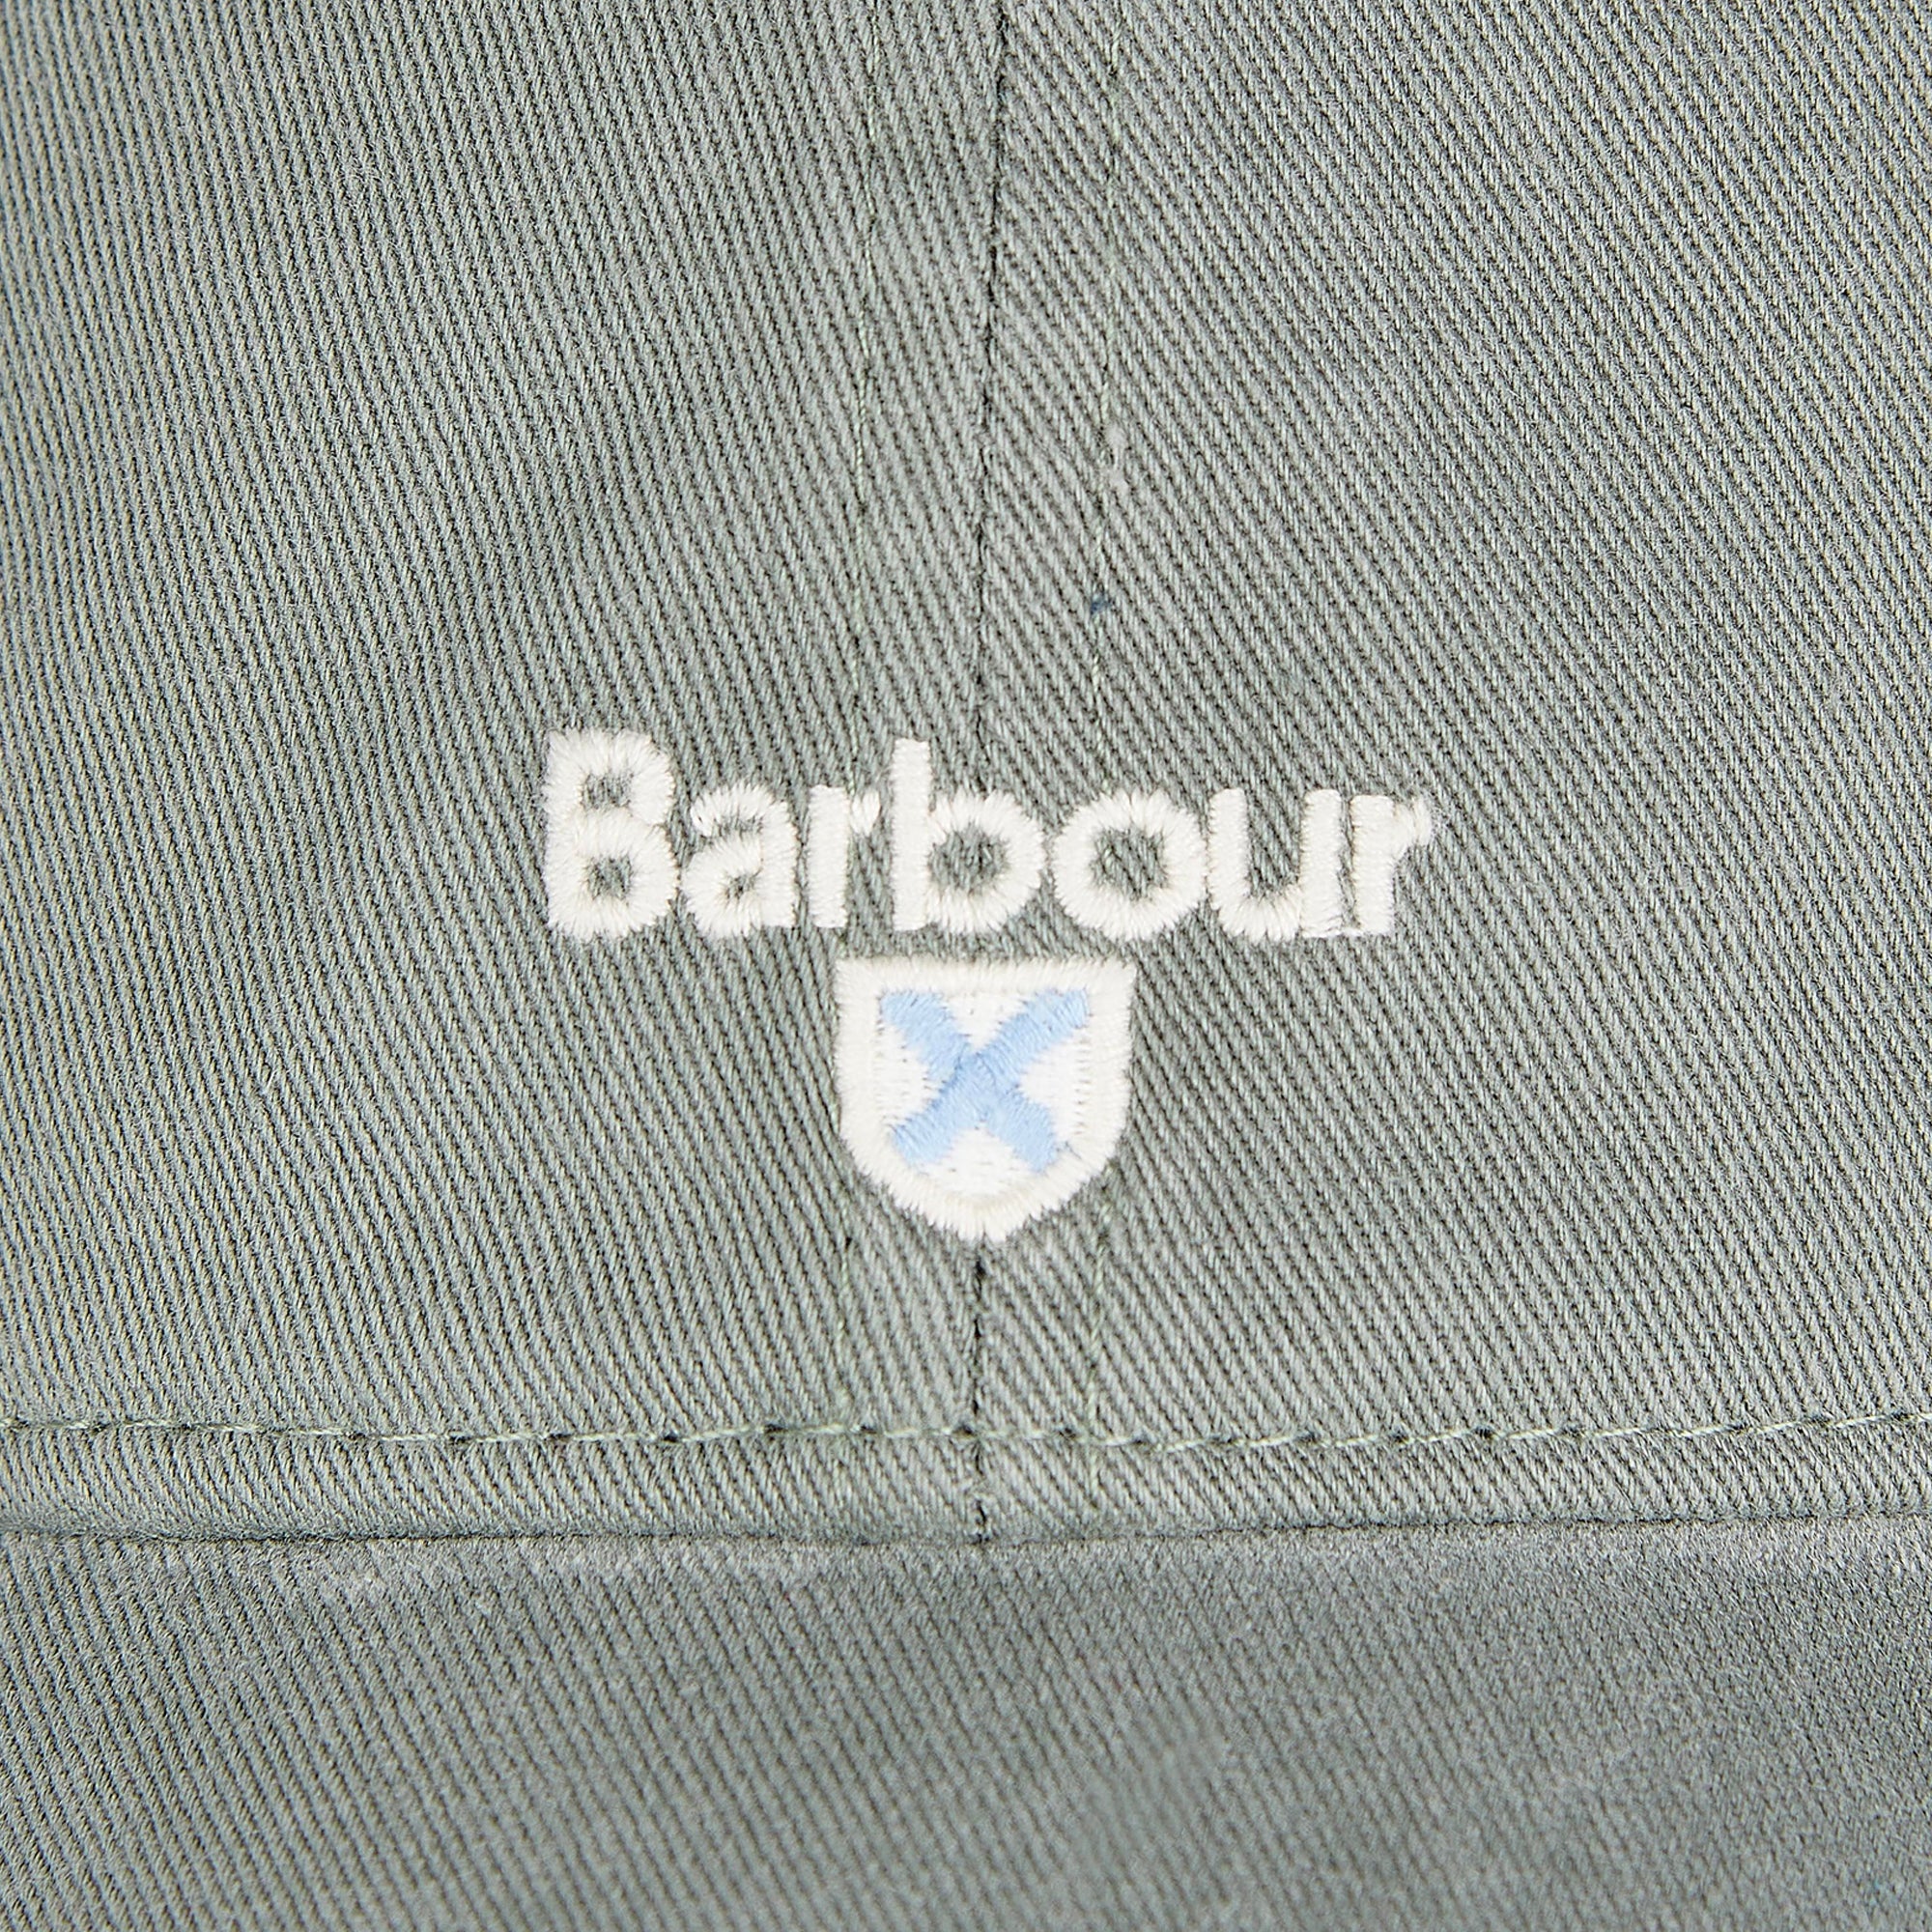 Barbour Cascade Washed Sports Cap - Agave Green